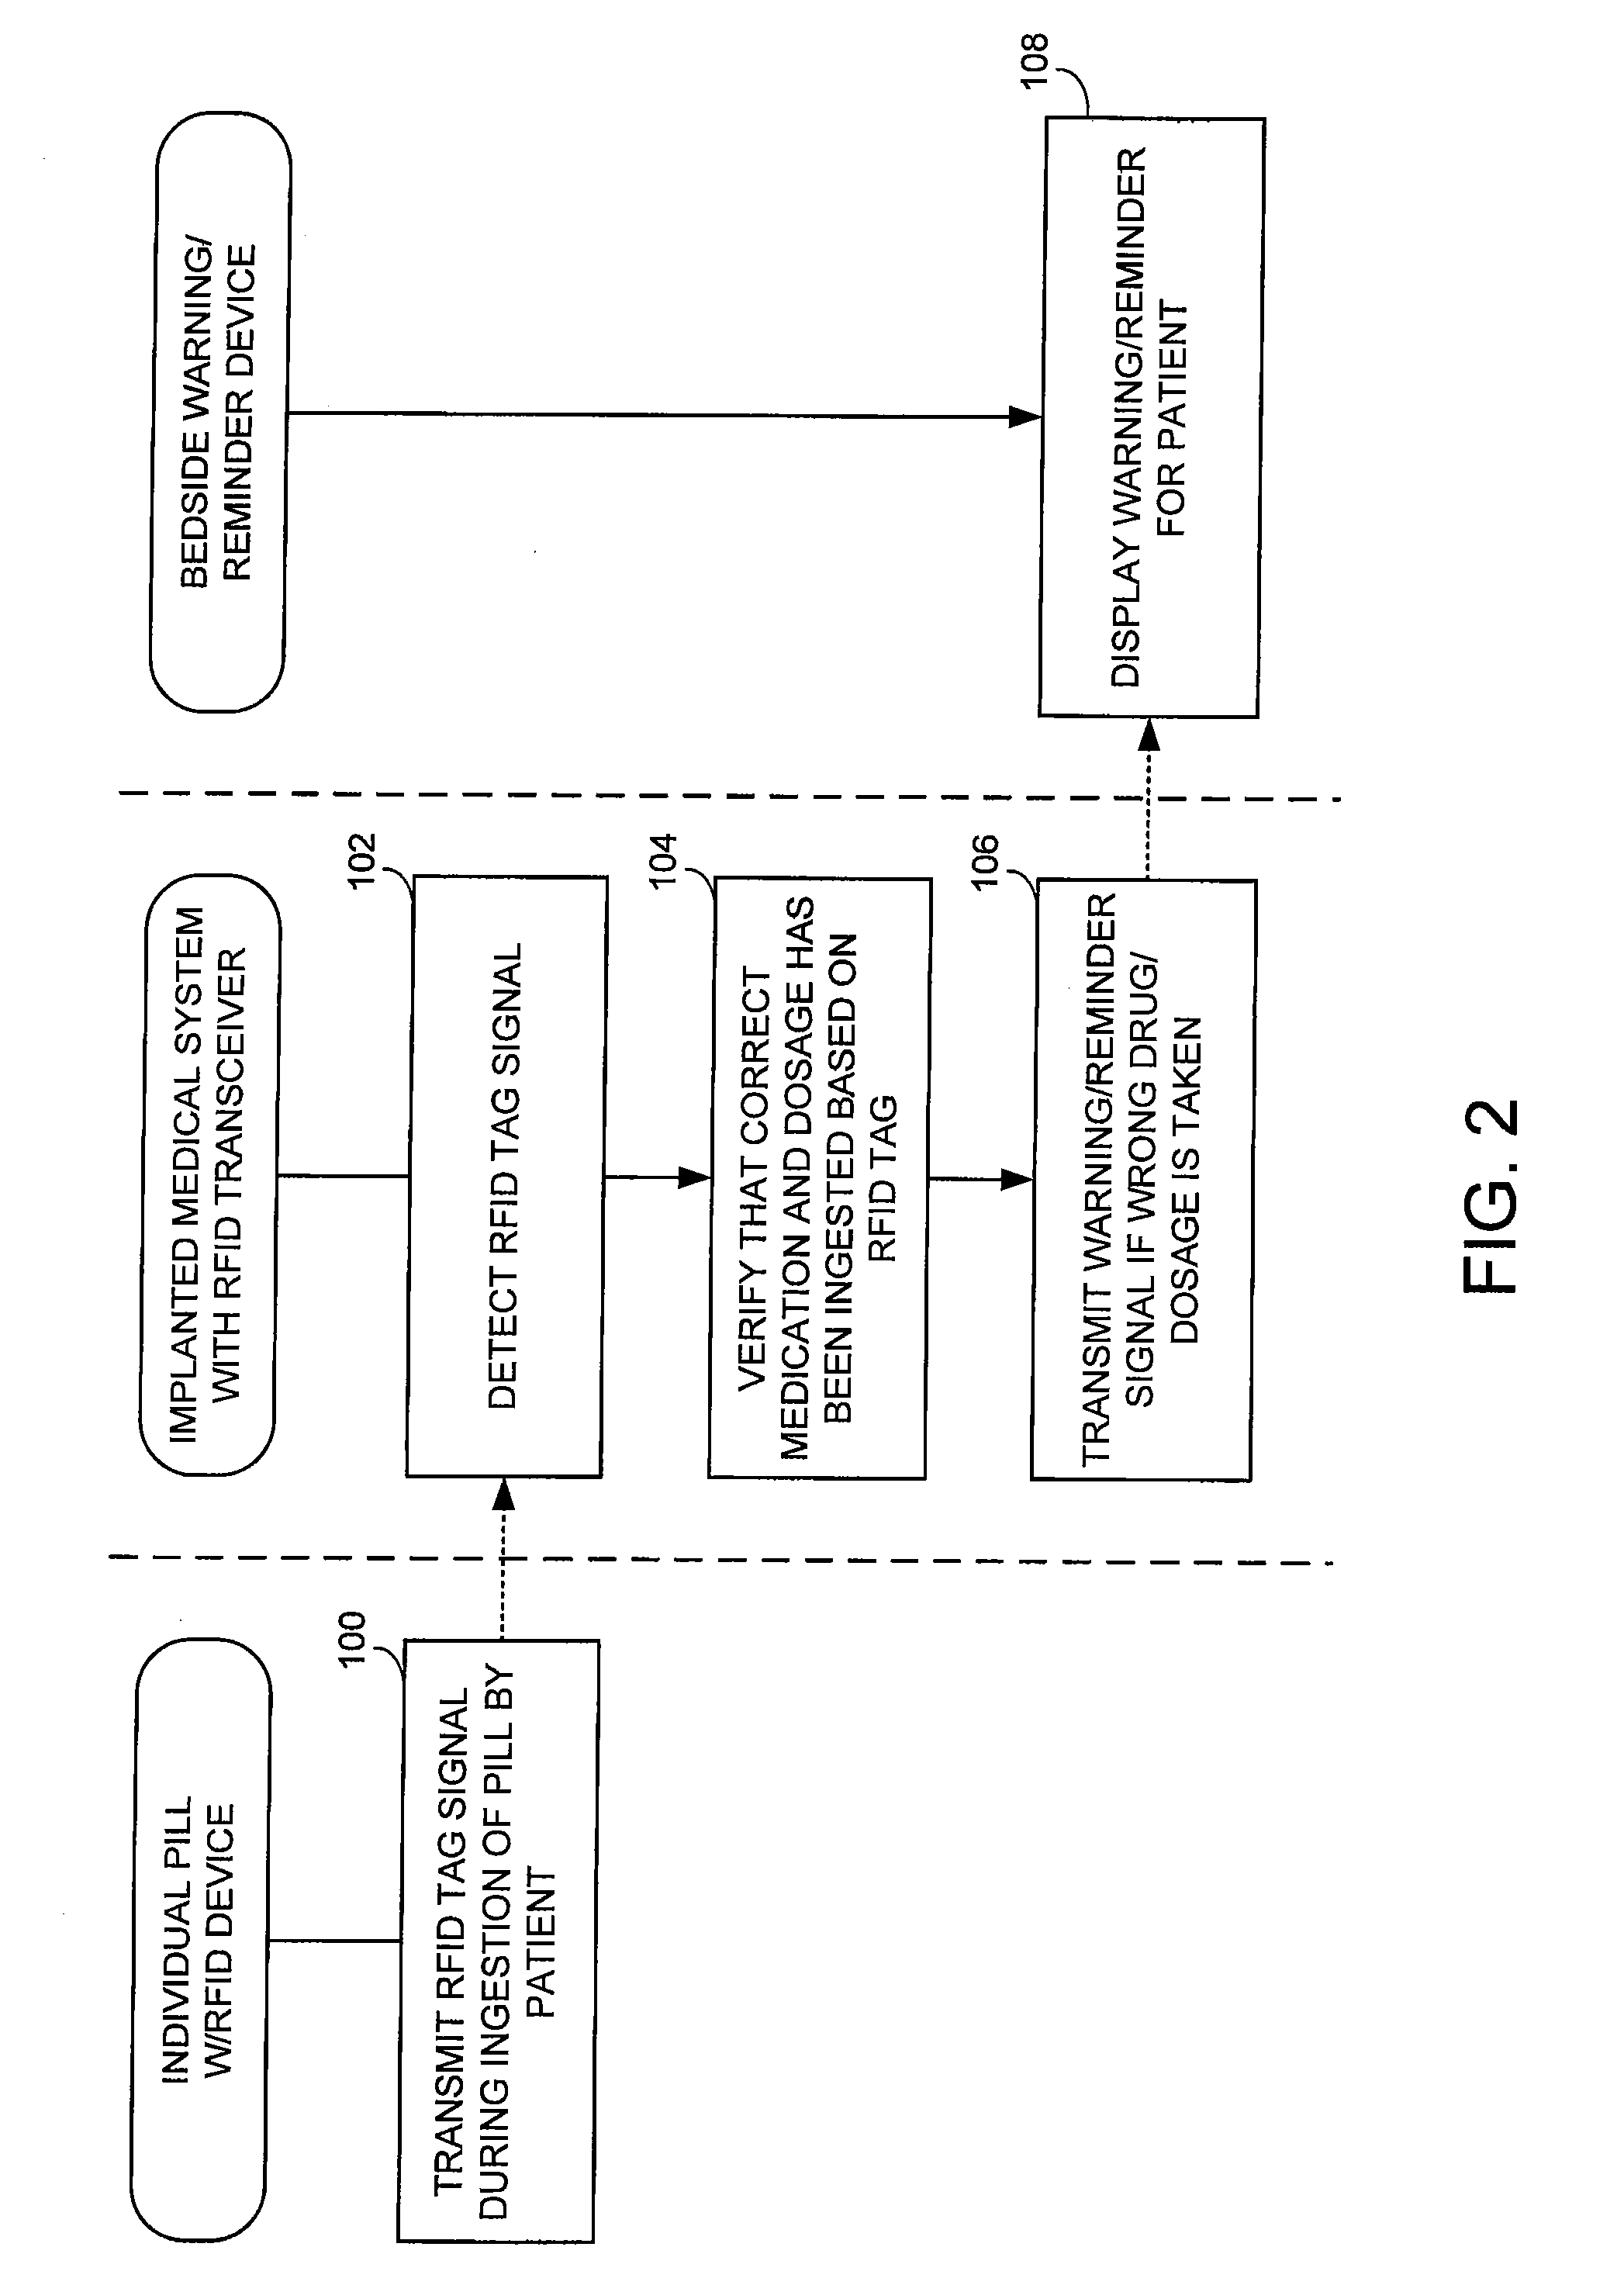 Method and apparatus for monitoring ingestion of medications using an implantable medical device